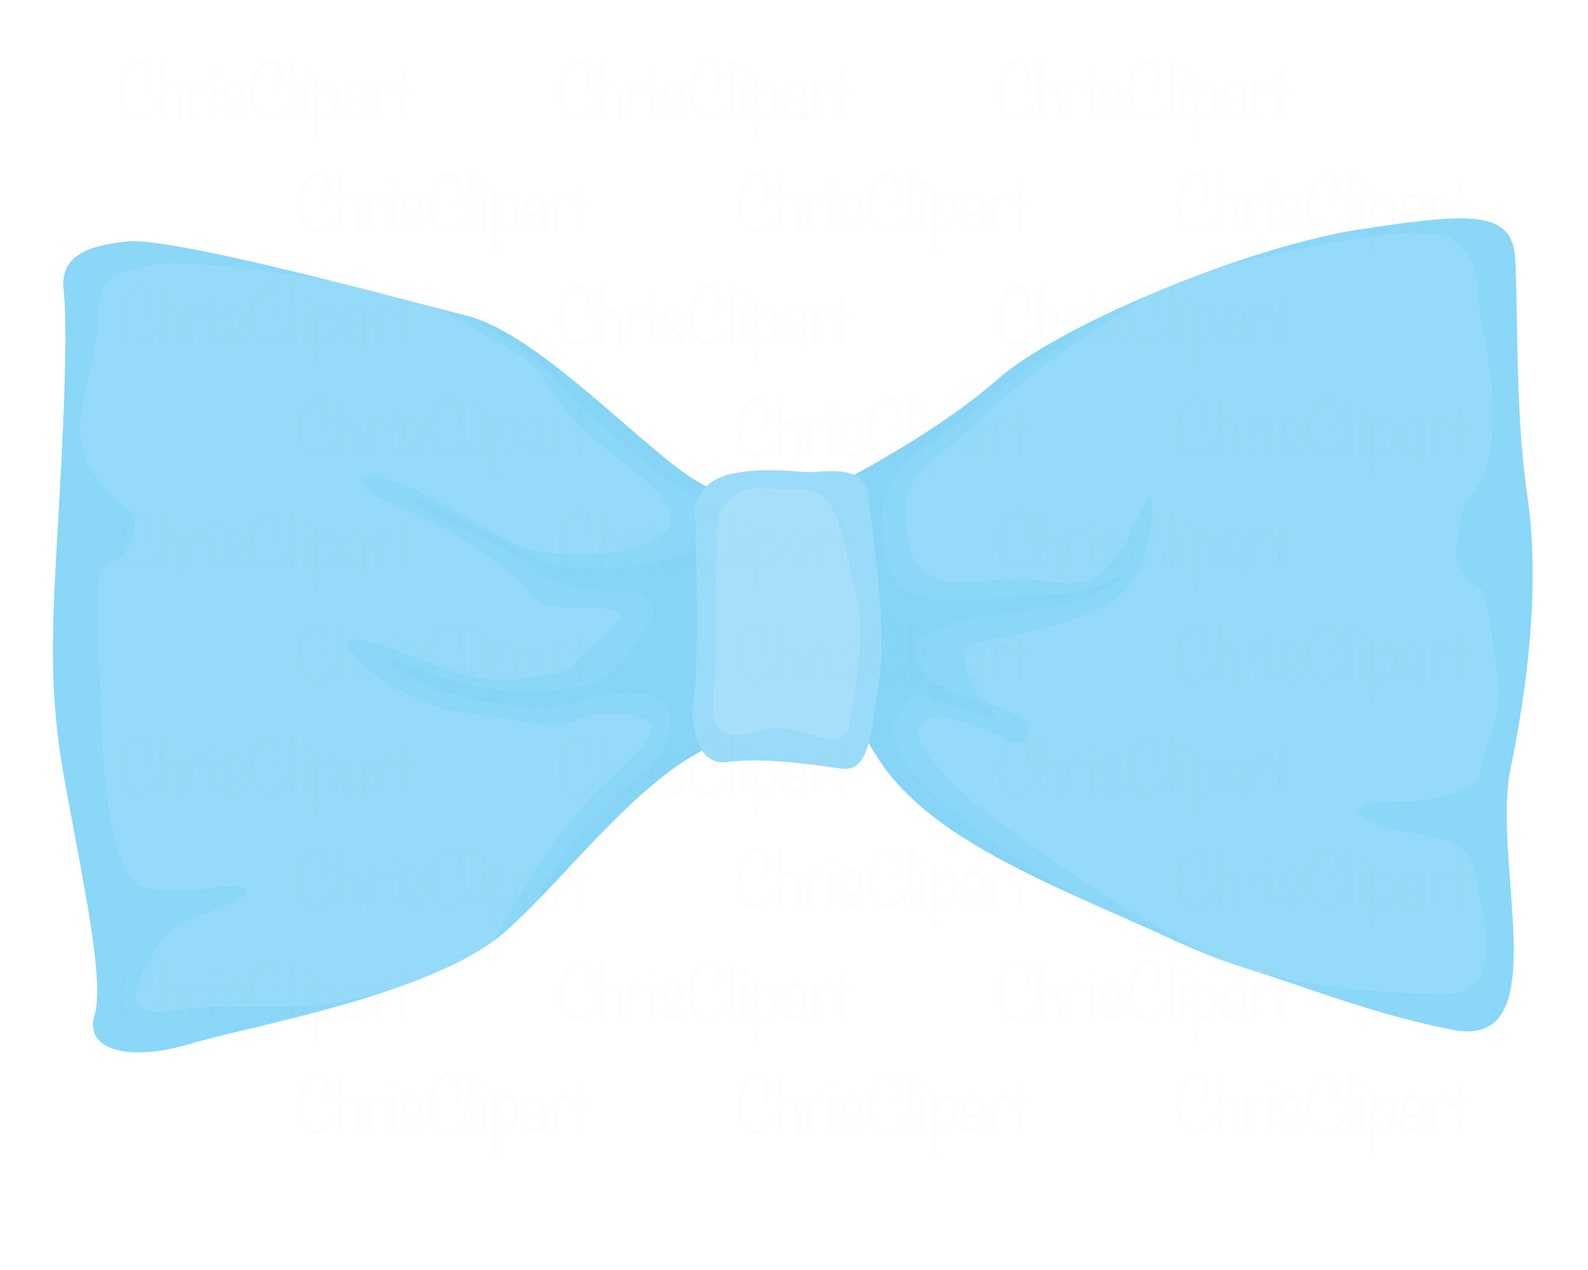 BOWTIE CLIPART Bow Tie Jpg Bowtie Graphic Bowtie Png Bow - Etsy